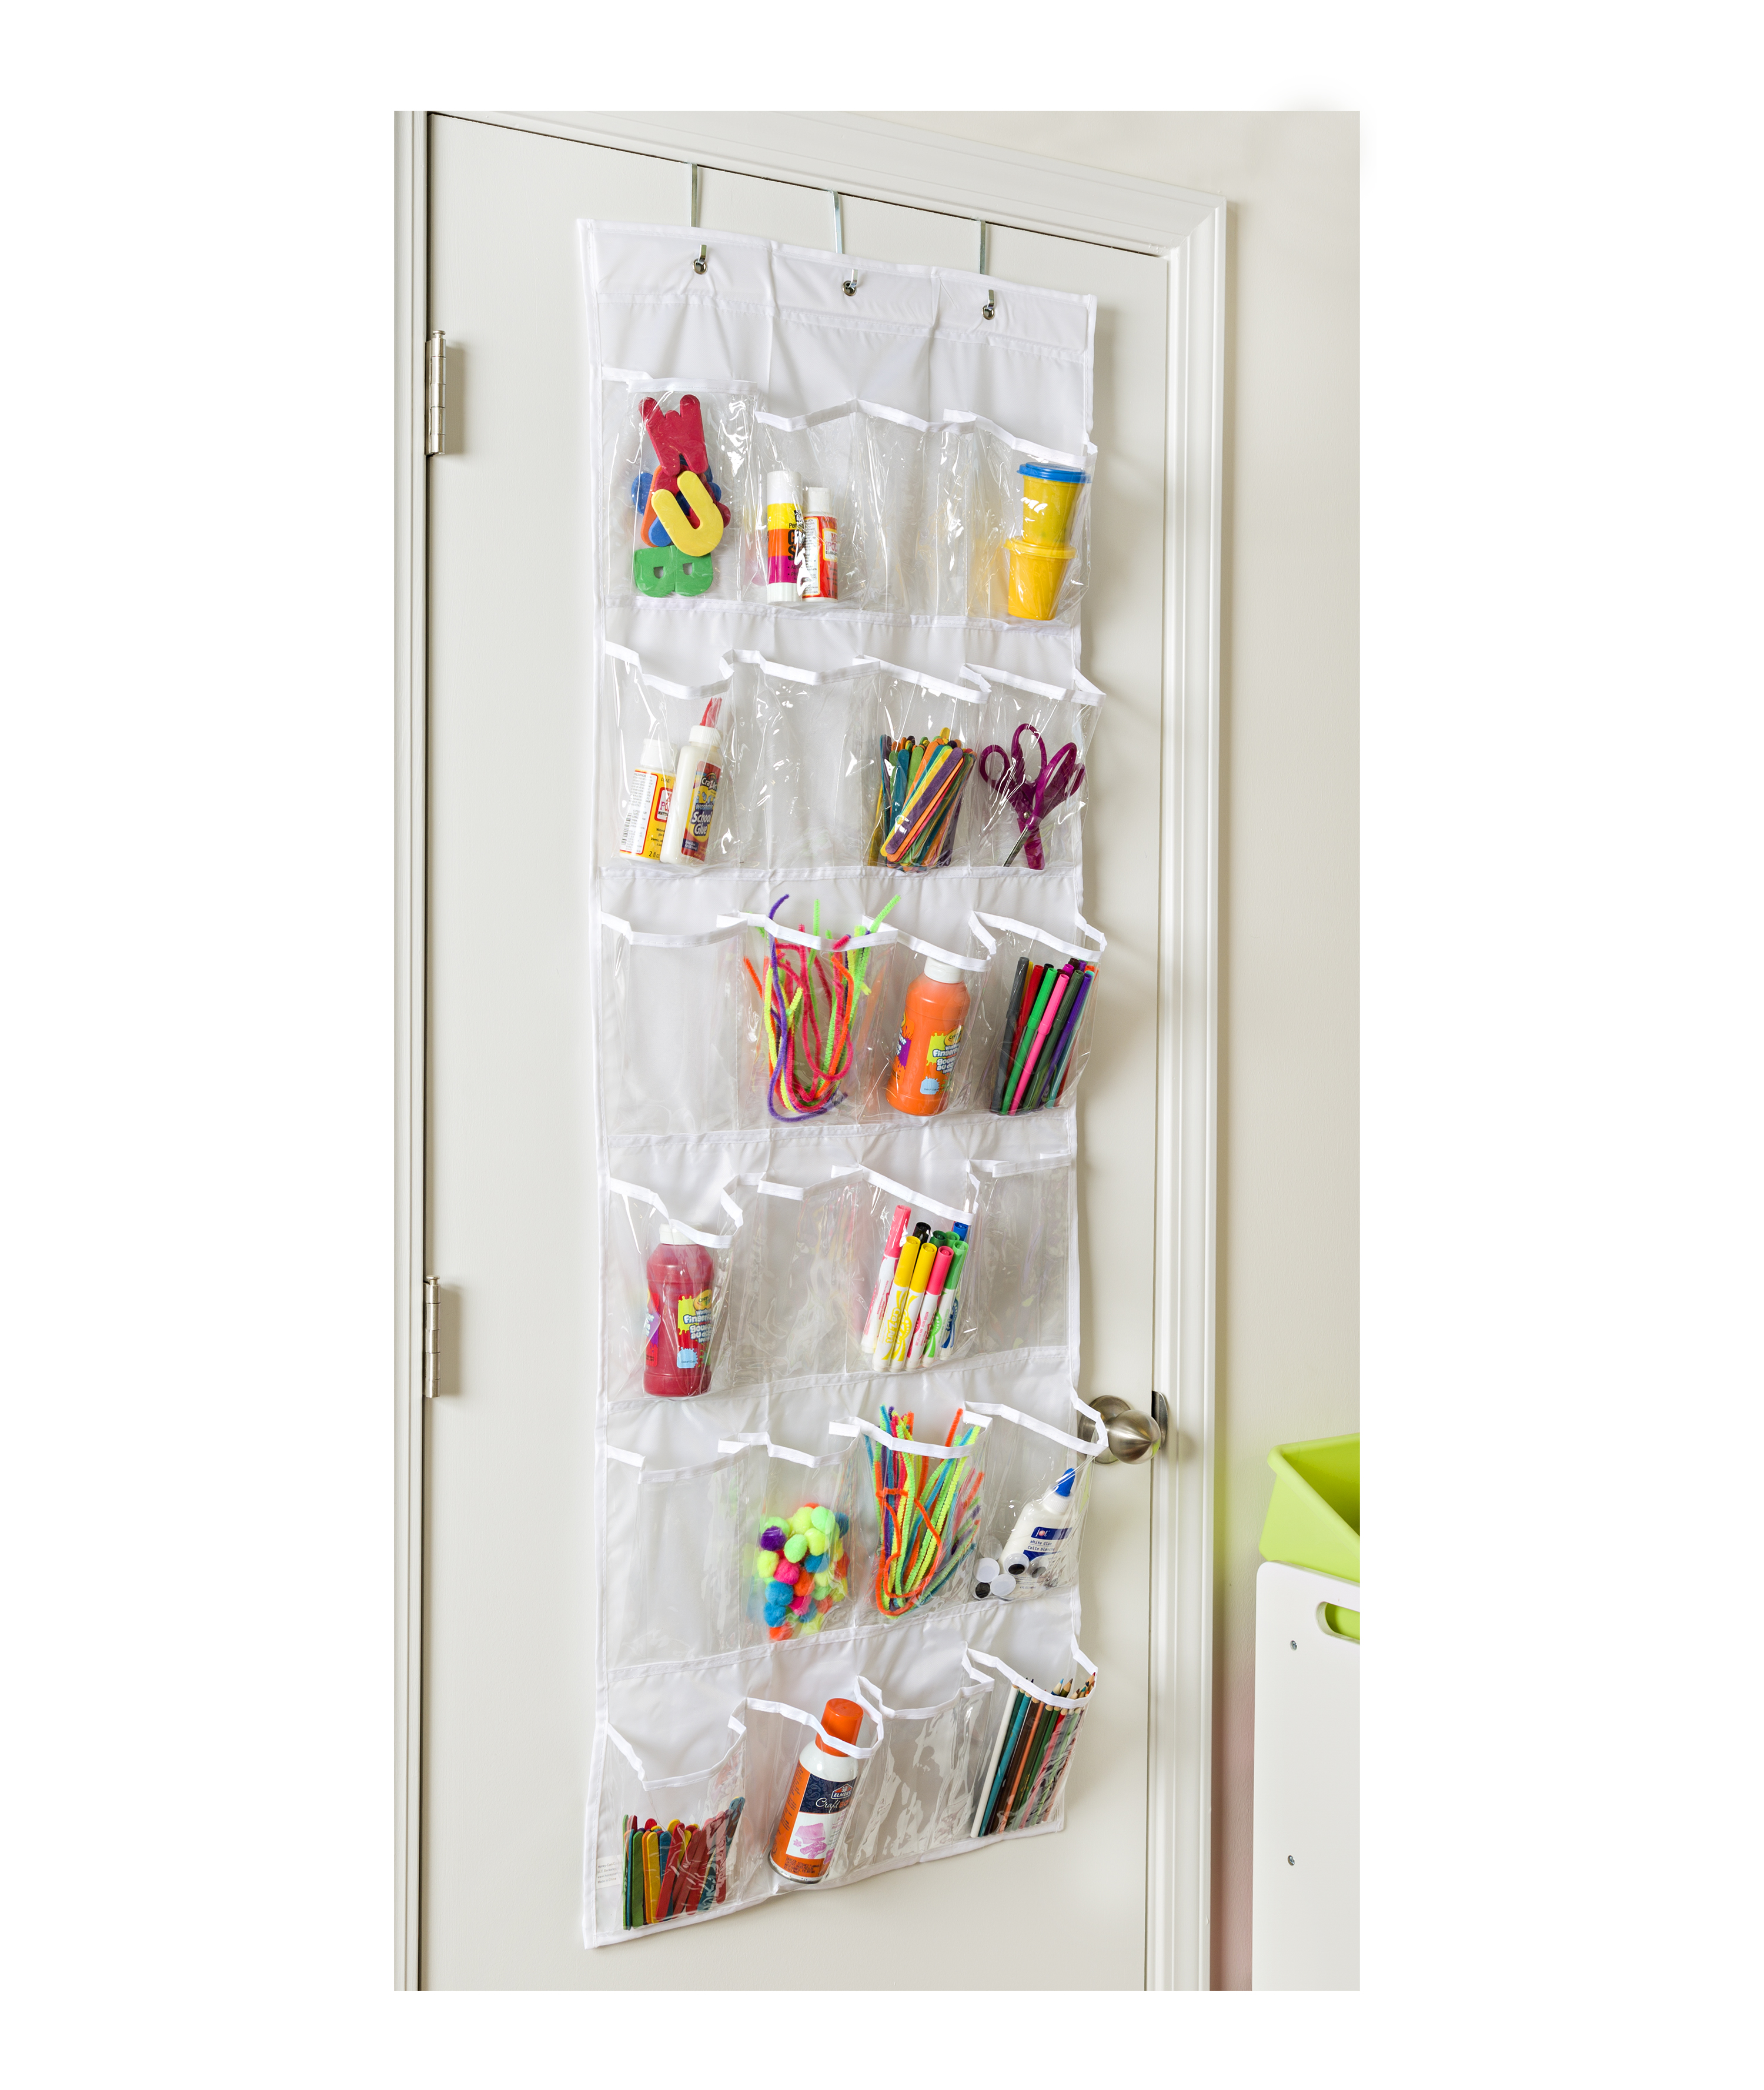 Honey-Can-Do PEVA 24-Pocket Over-the-Door Hanging Organizer, White/Clear - image 1 of 4